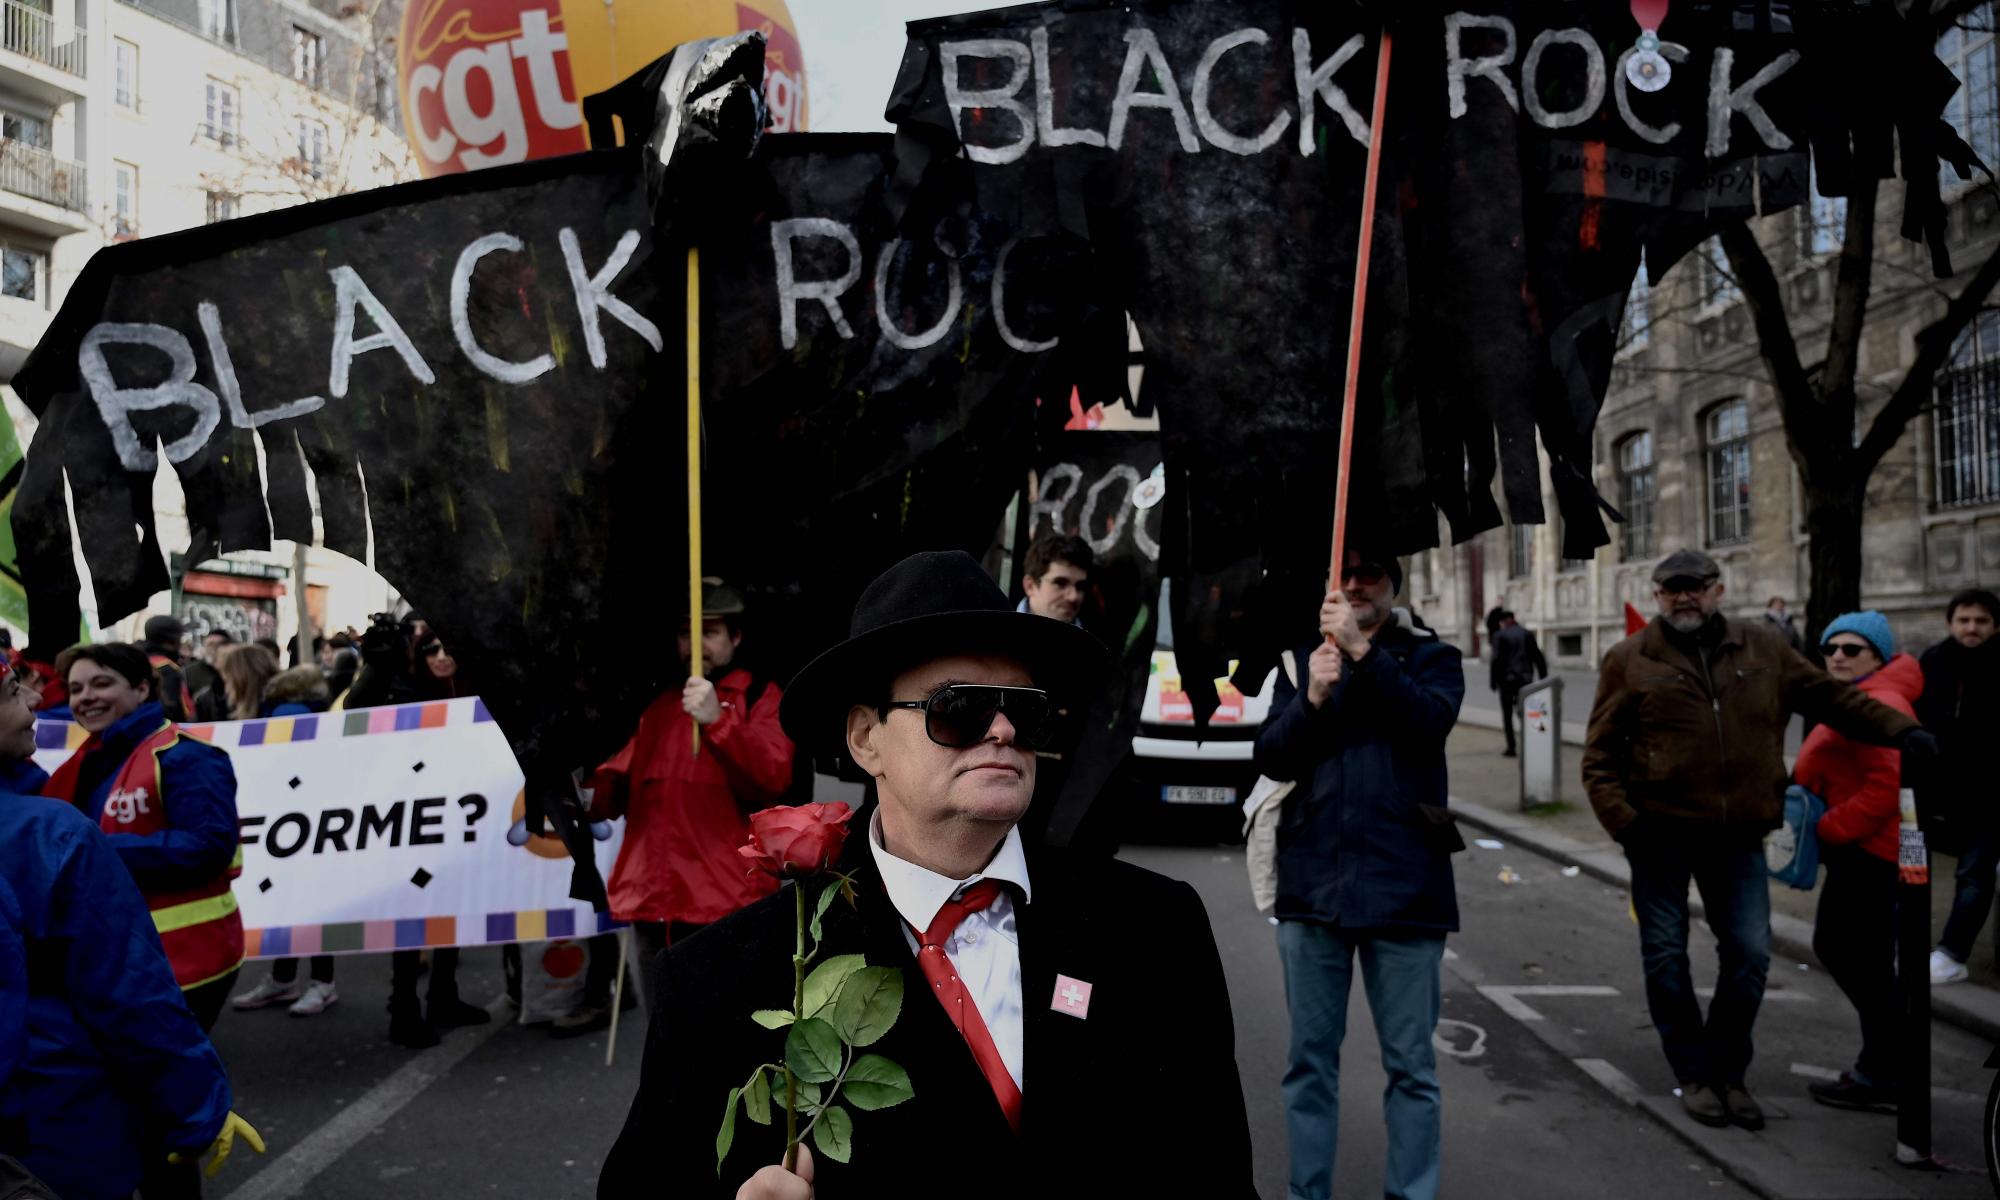 BlackRock gets praise for coal divestment. What it really needs is regulation | Ann Pettifor